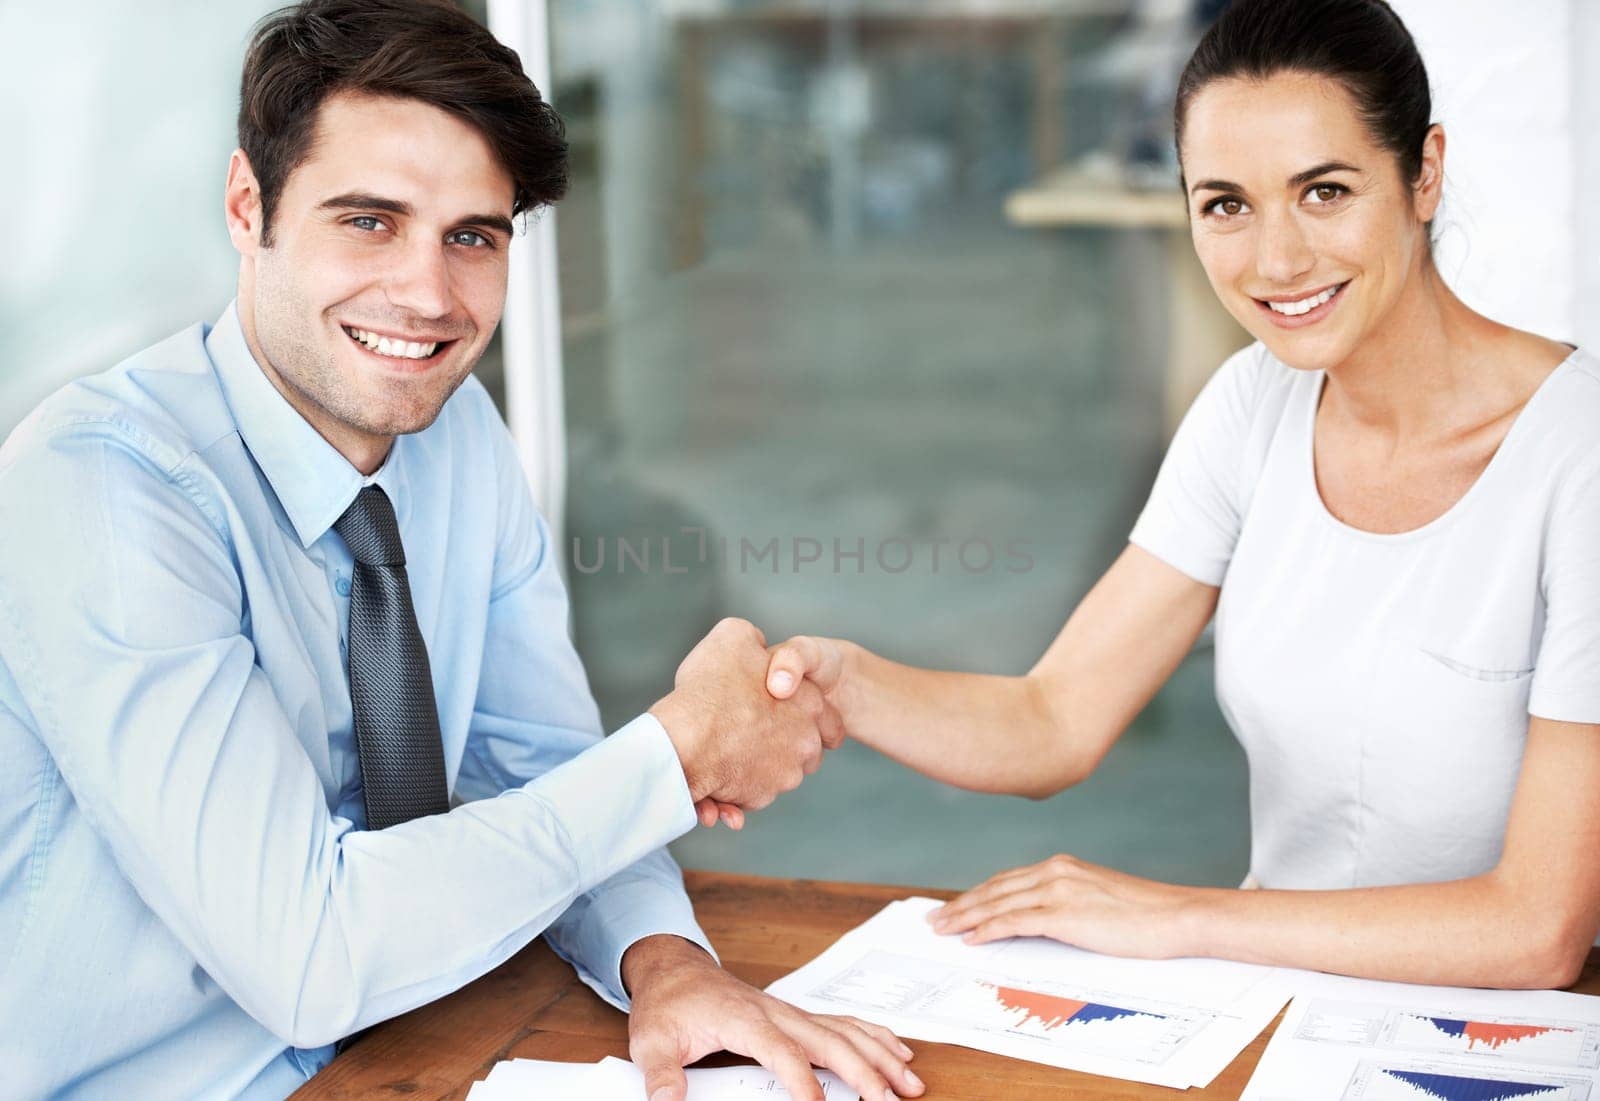 Working in complete synergy. Young businesspeople shaking hands while seated at a desk